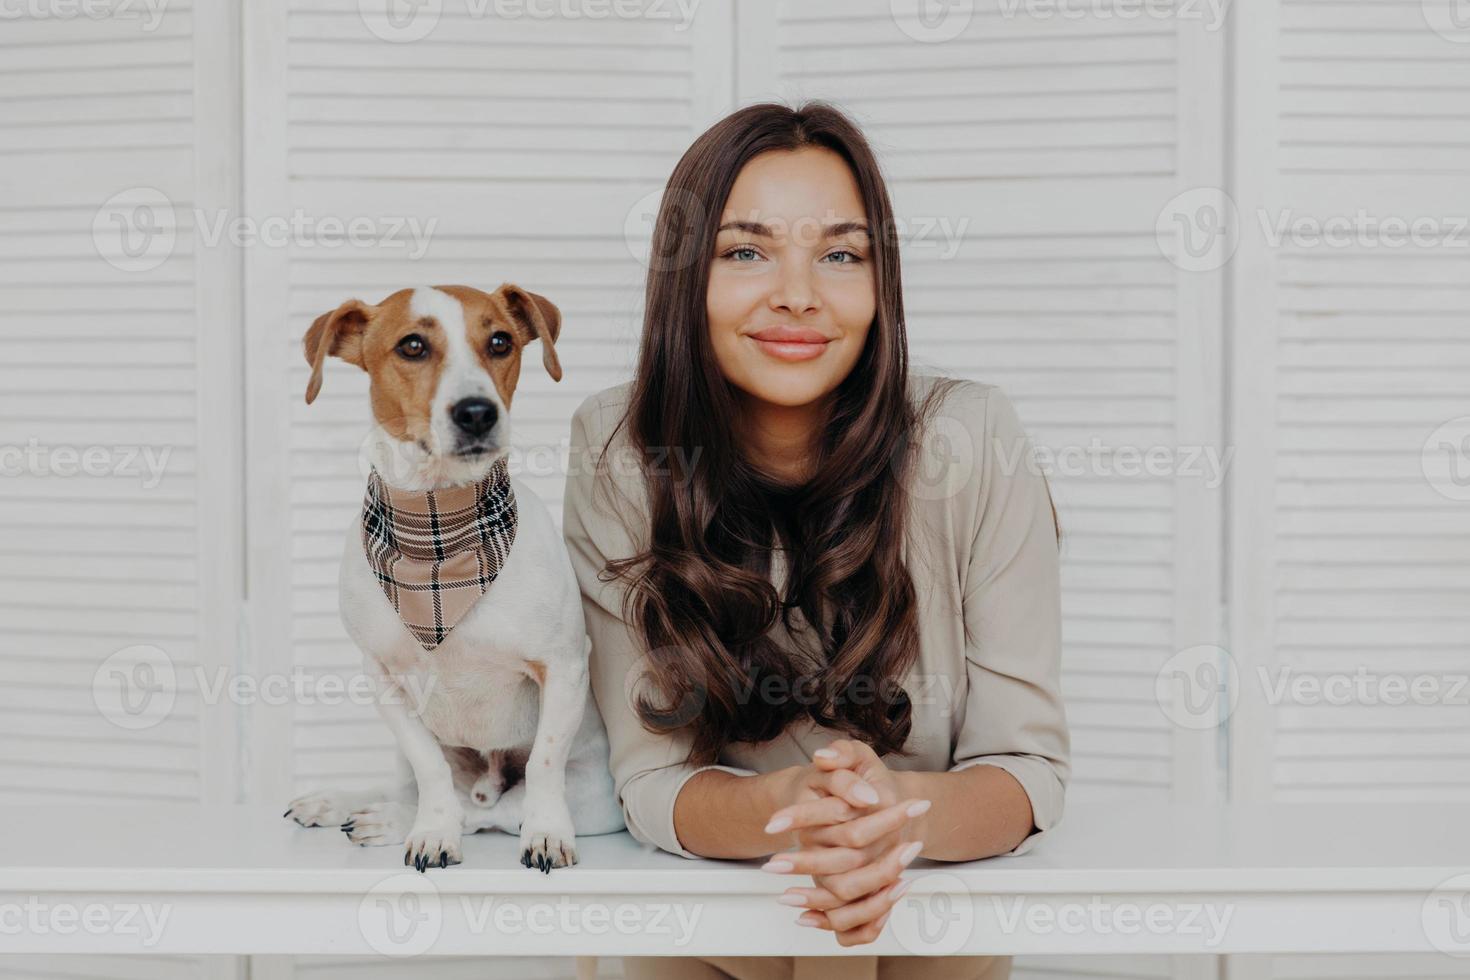 Photo of good looking woman with dark hair, spends leisure time with jack russel terrier dog, loves animals, have friendly relationship with pet, pose together at white table, play together.